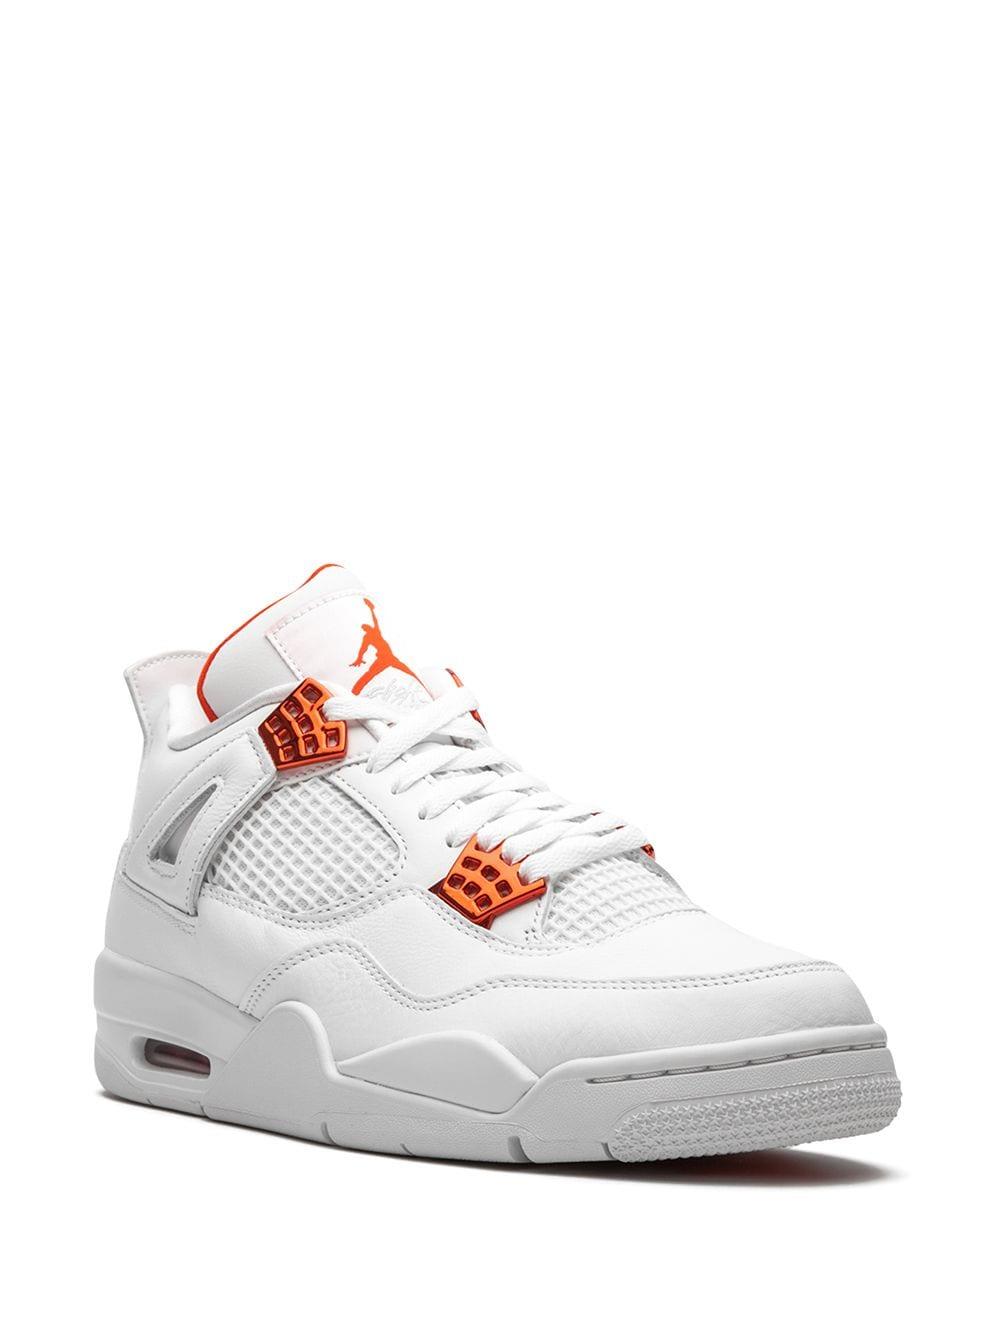 Nike Leather Air 4 Retro Sneakers in White for Men - Save 62% - Lyst